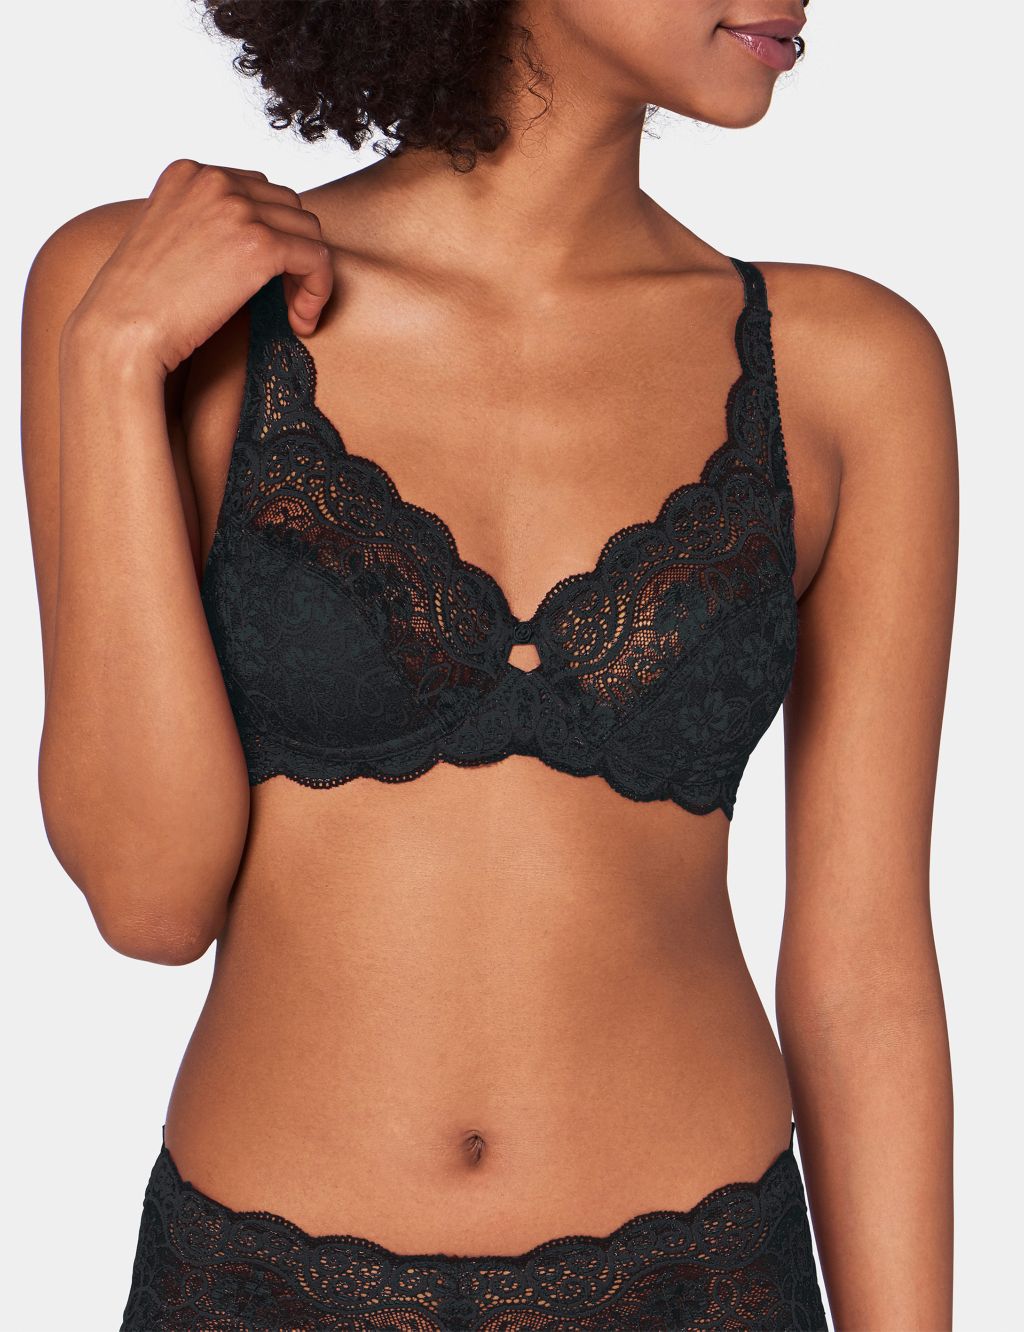 Amourette 300 Lace Underwired Full Cup Bra B-G 2 of 4